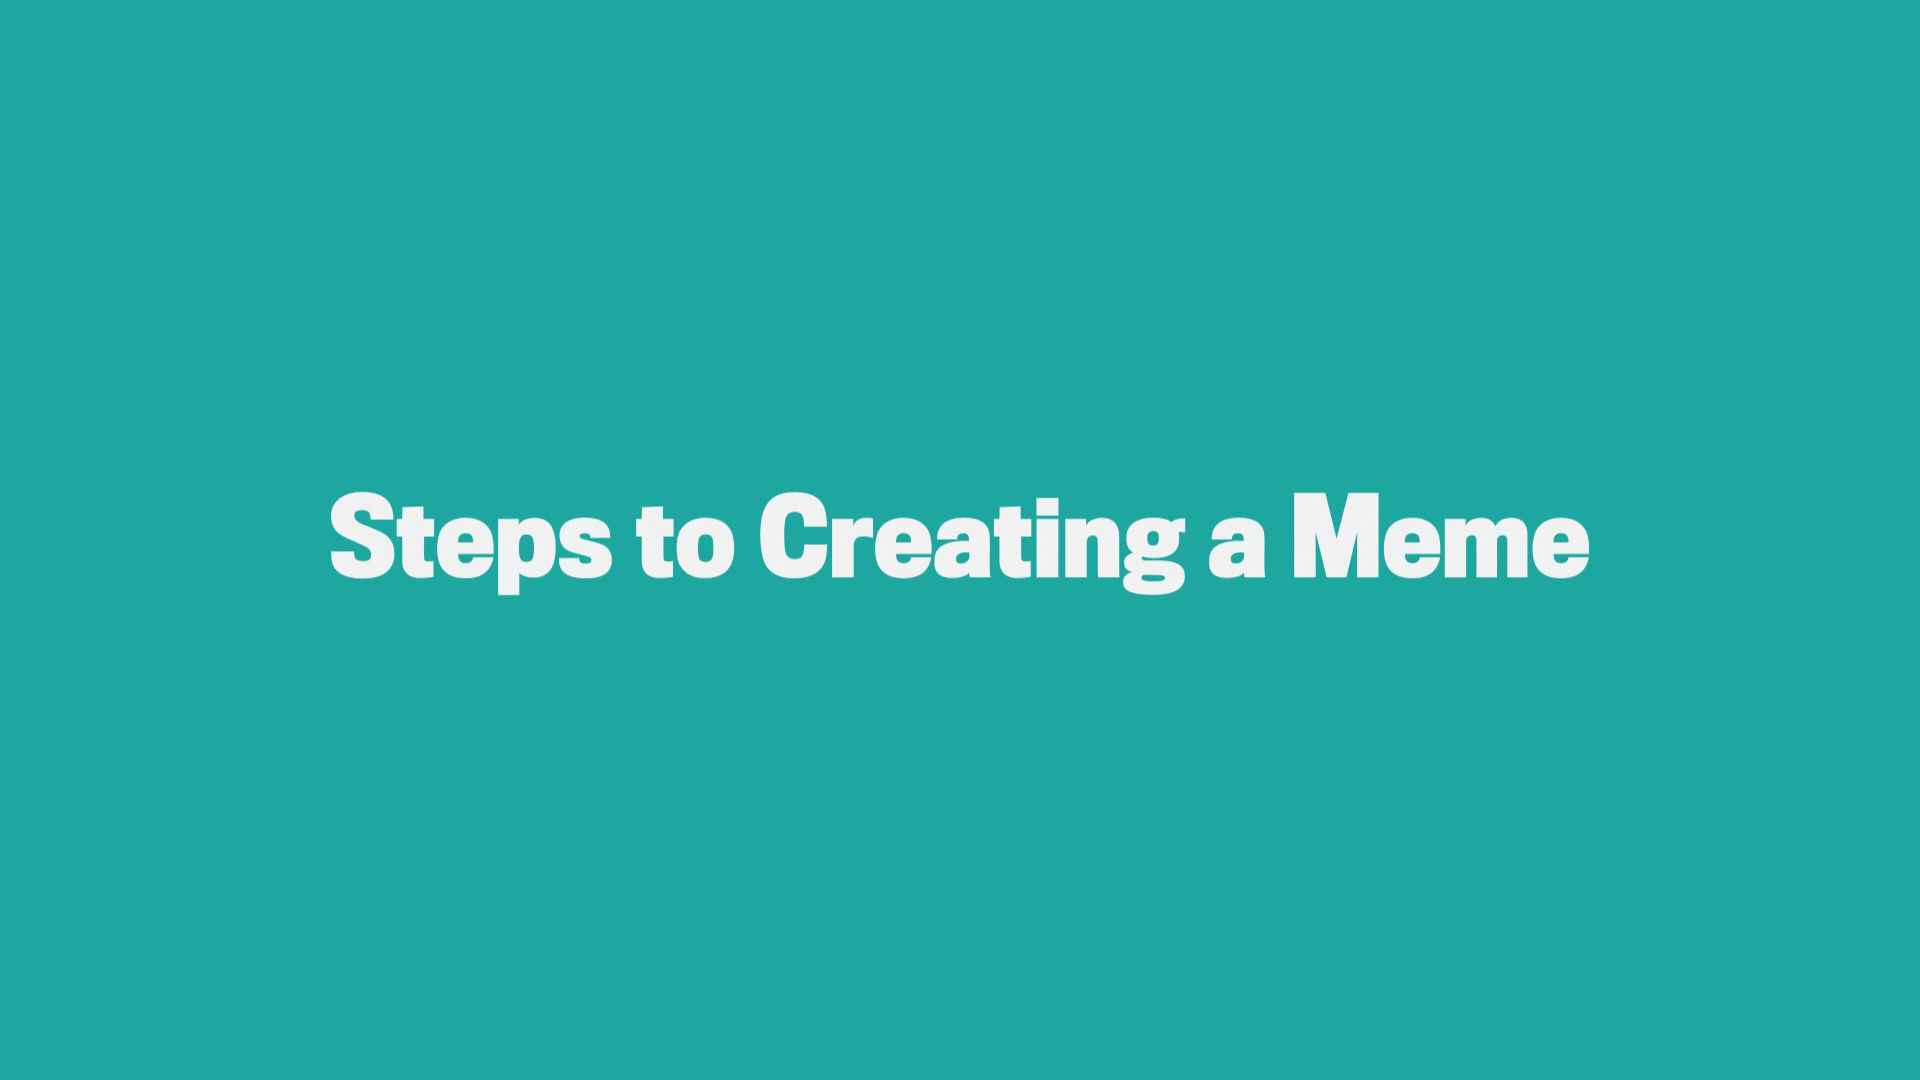 Steps to creating a meme on img flip